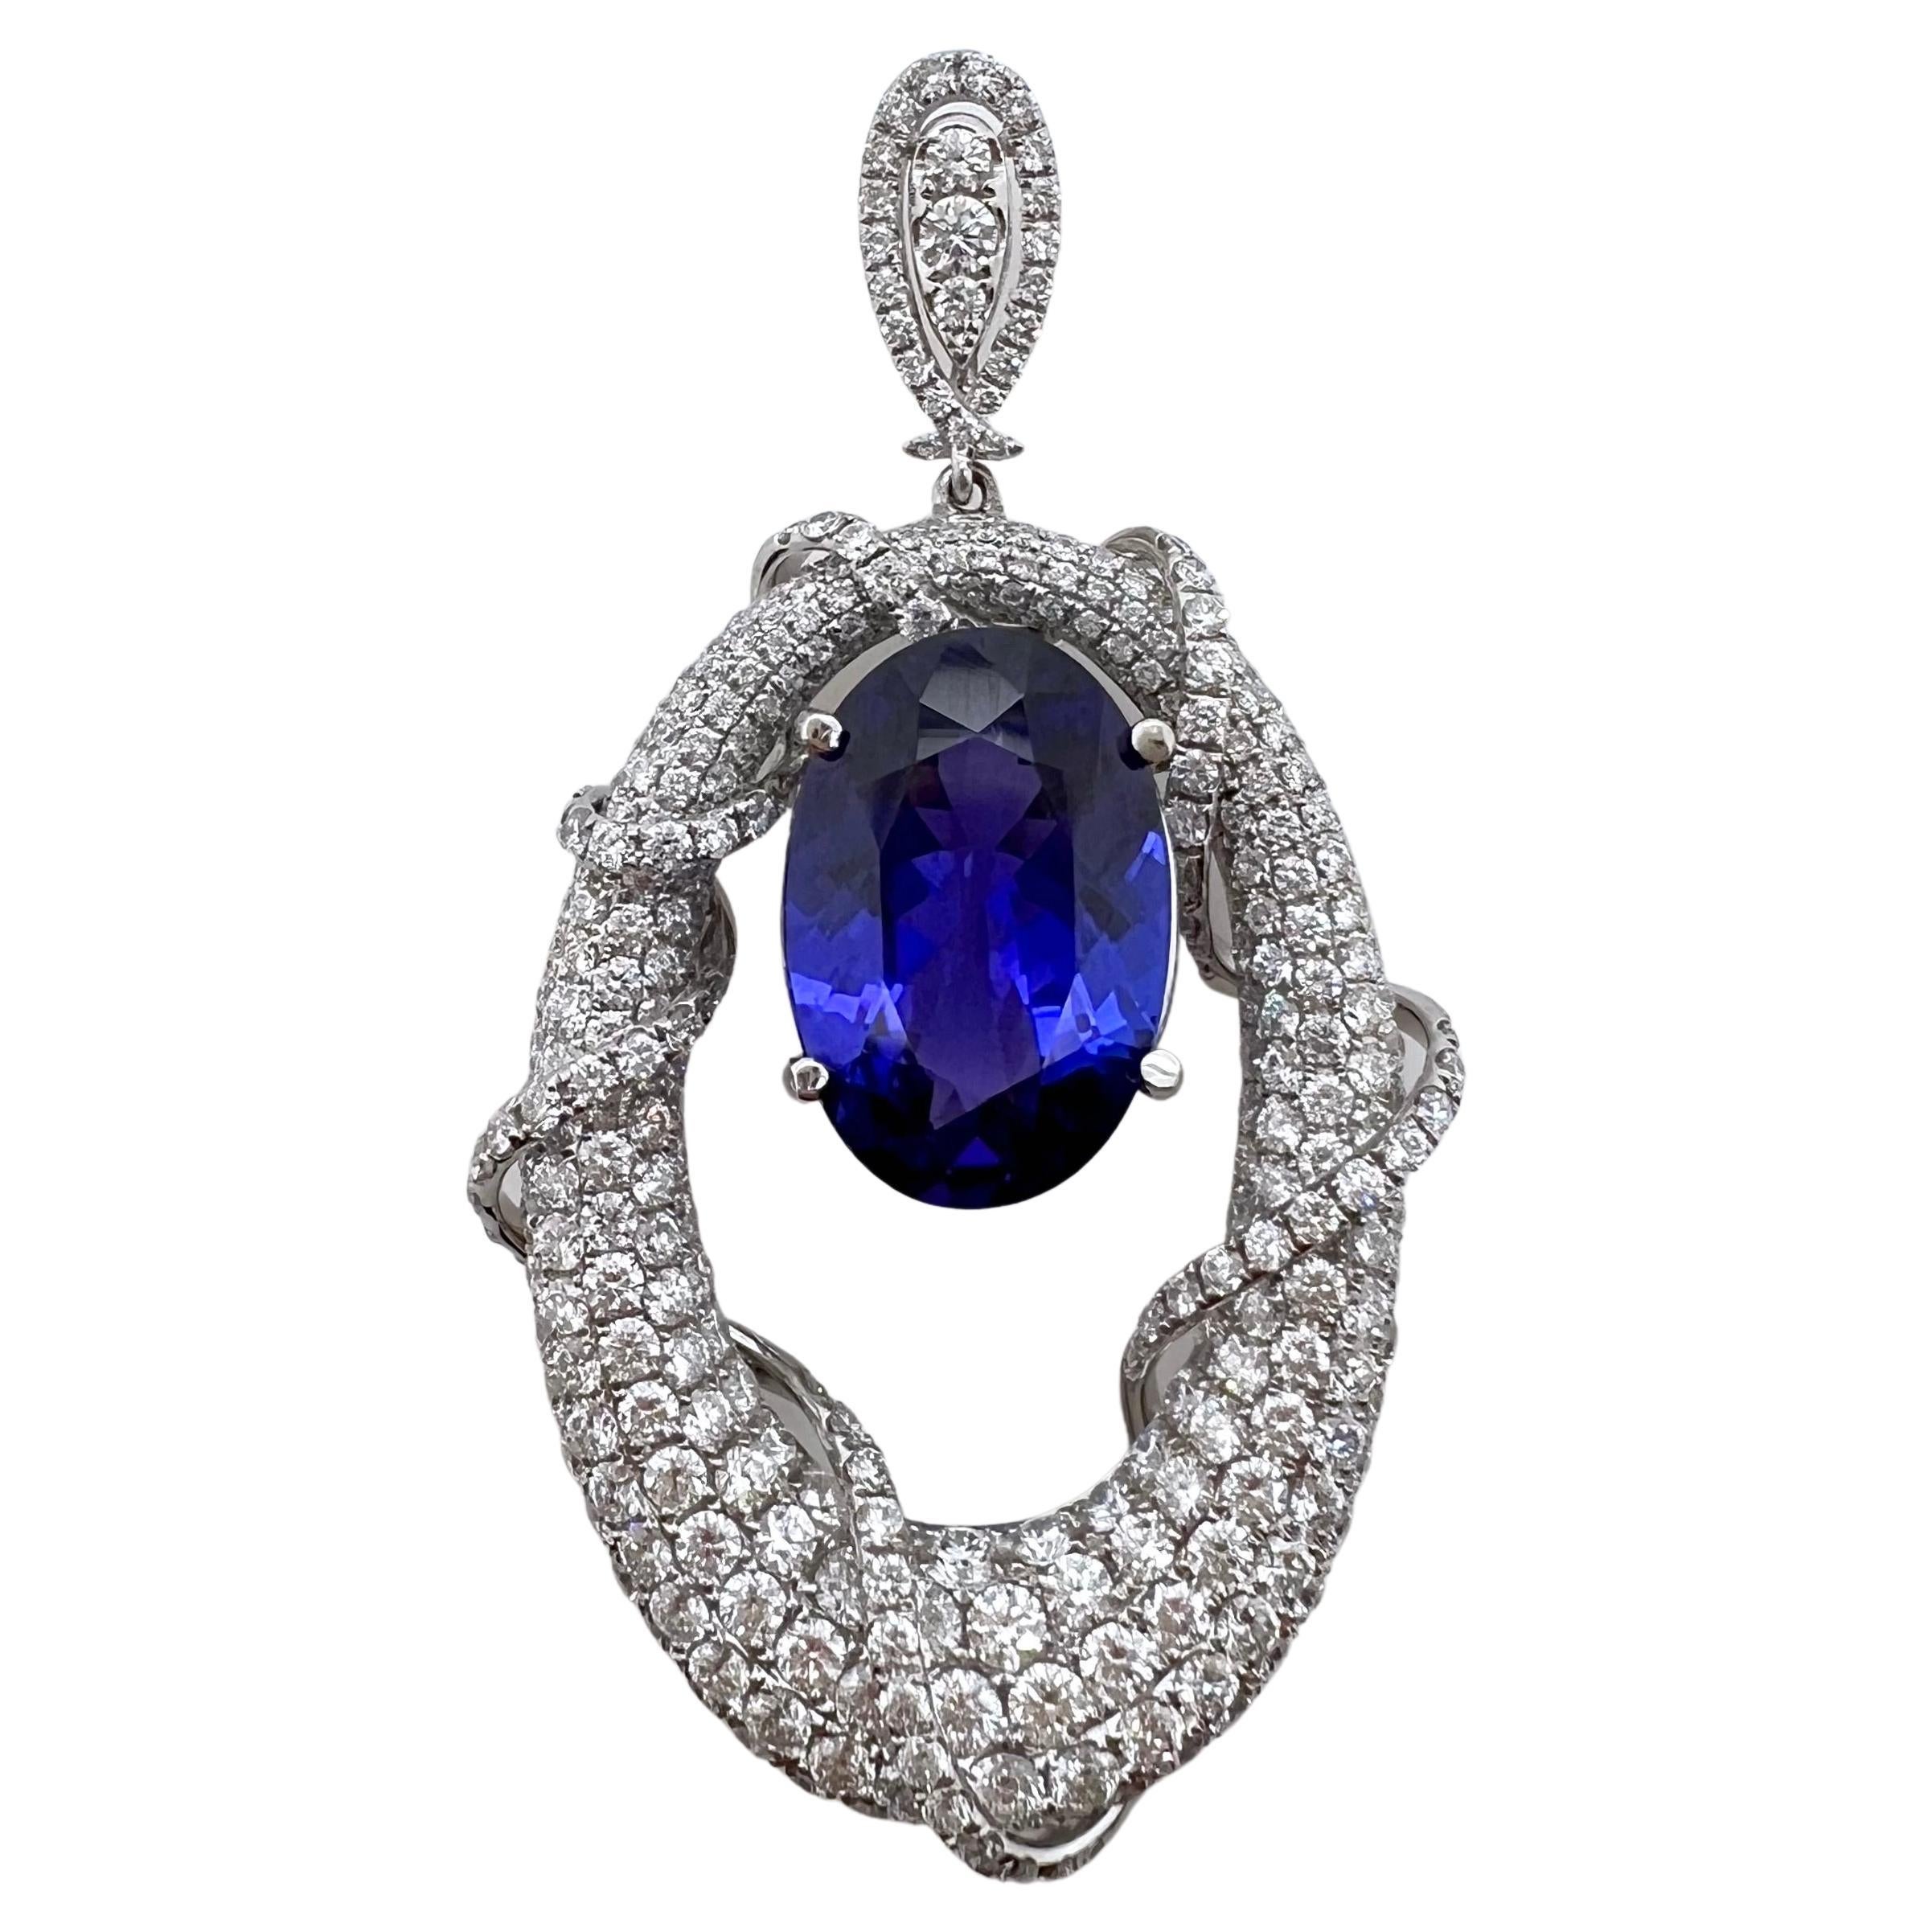 This contemporary tanzanite pendant will get everyone's attention.  The unique, modern design is astonishing and will be your favorite pendant.  The vibrant tanzanite has rich hues of purple and flashes of pink while the round brilliant diamonds are